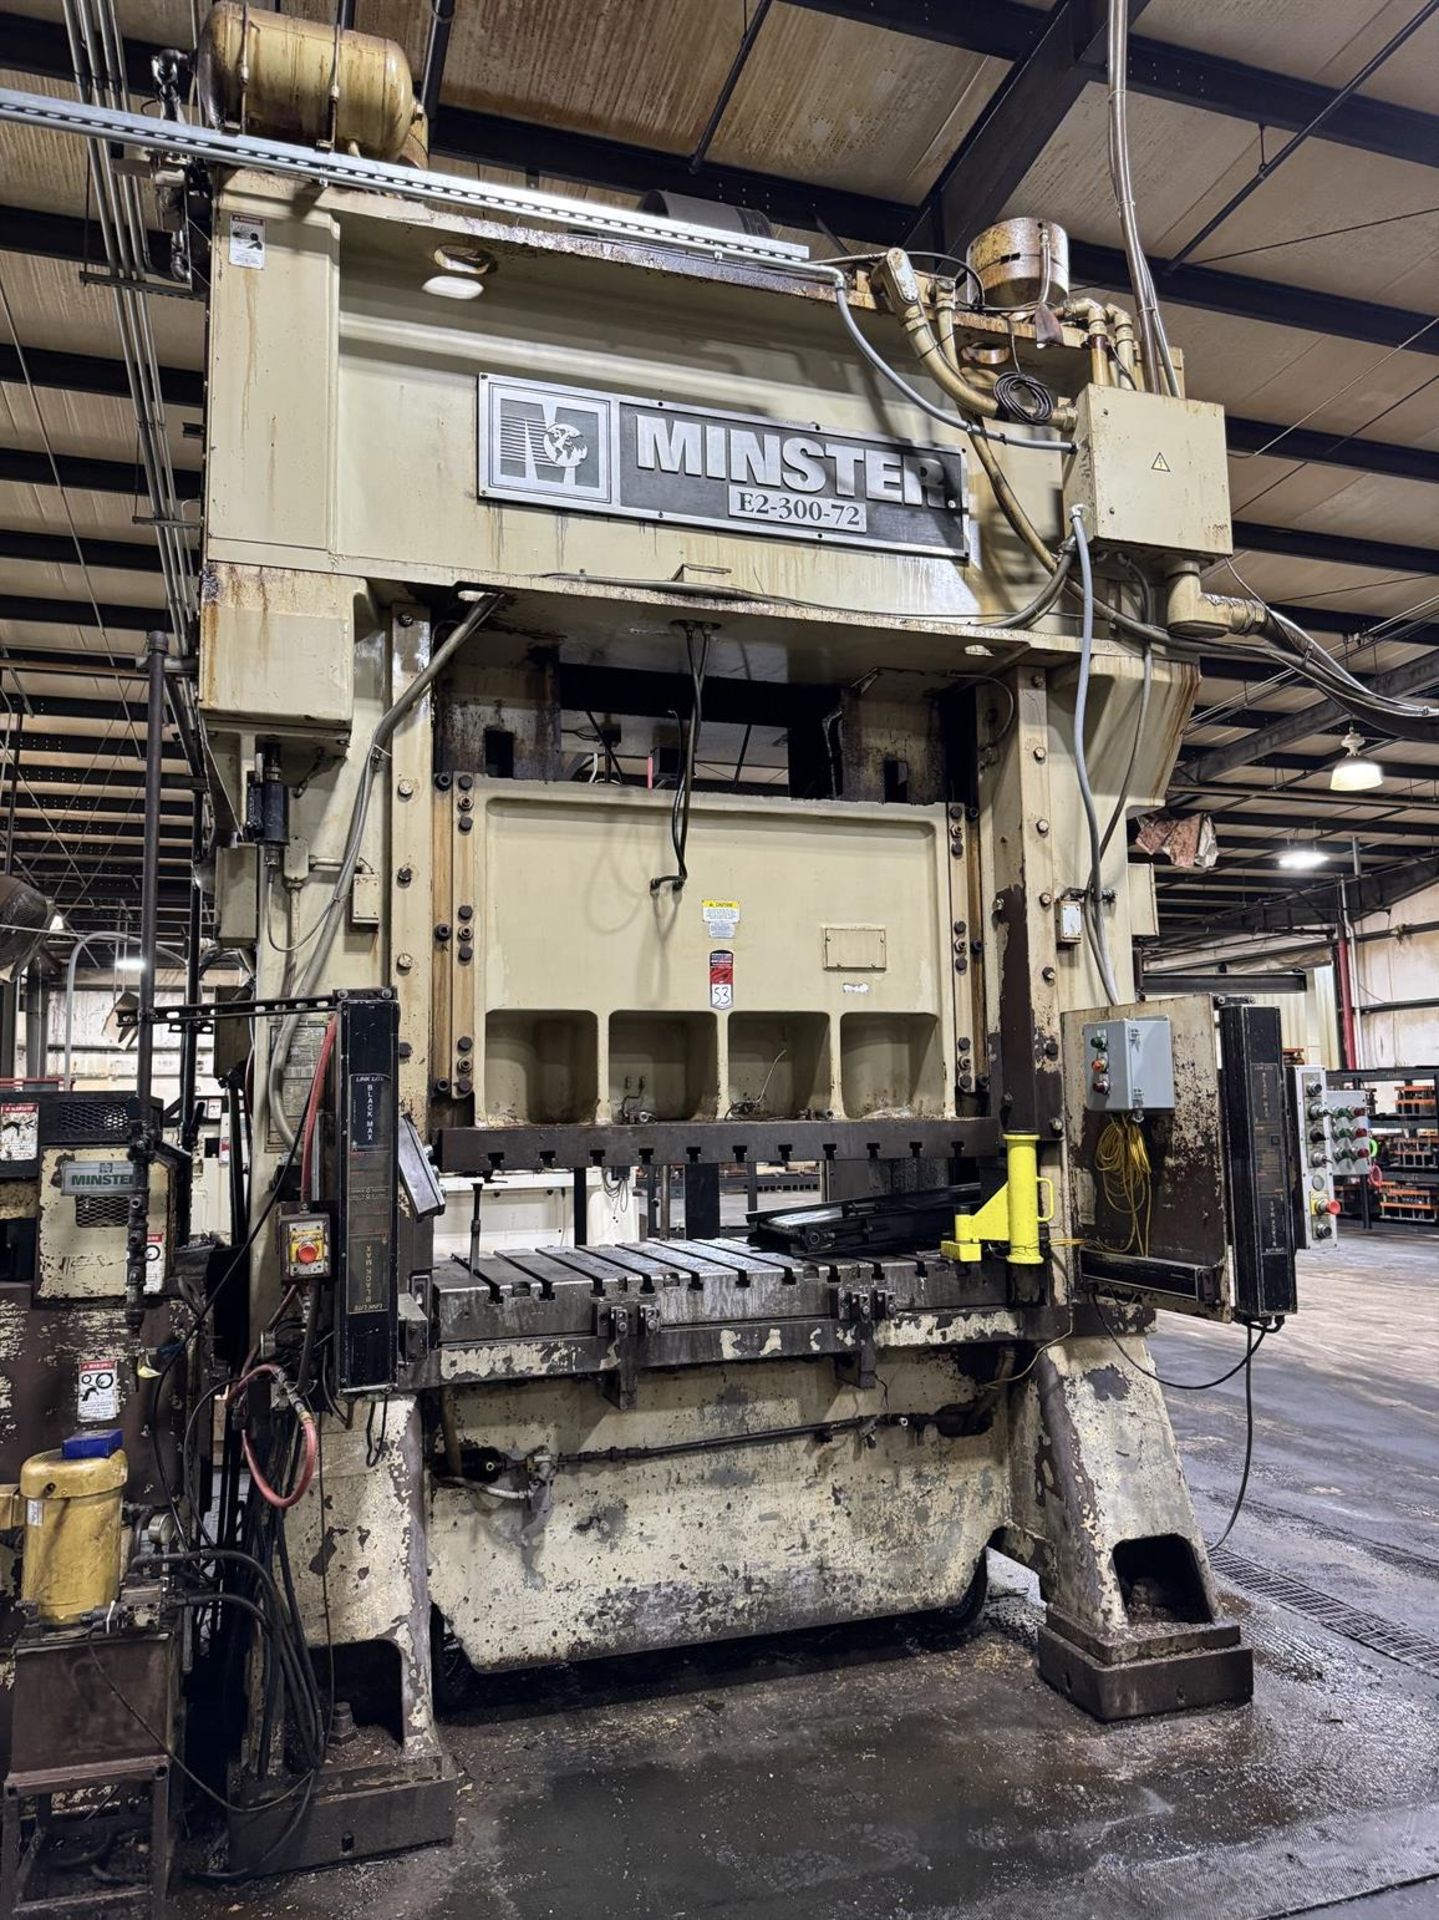 1997 MINSTER E2-300-72 HeviStamper 300 Ton Straight Side Press, s/n 29120, w/72”x 36” Bed, 26”